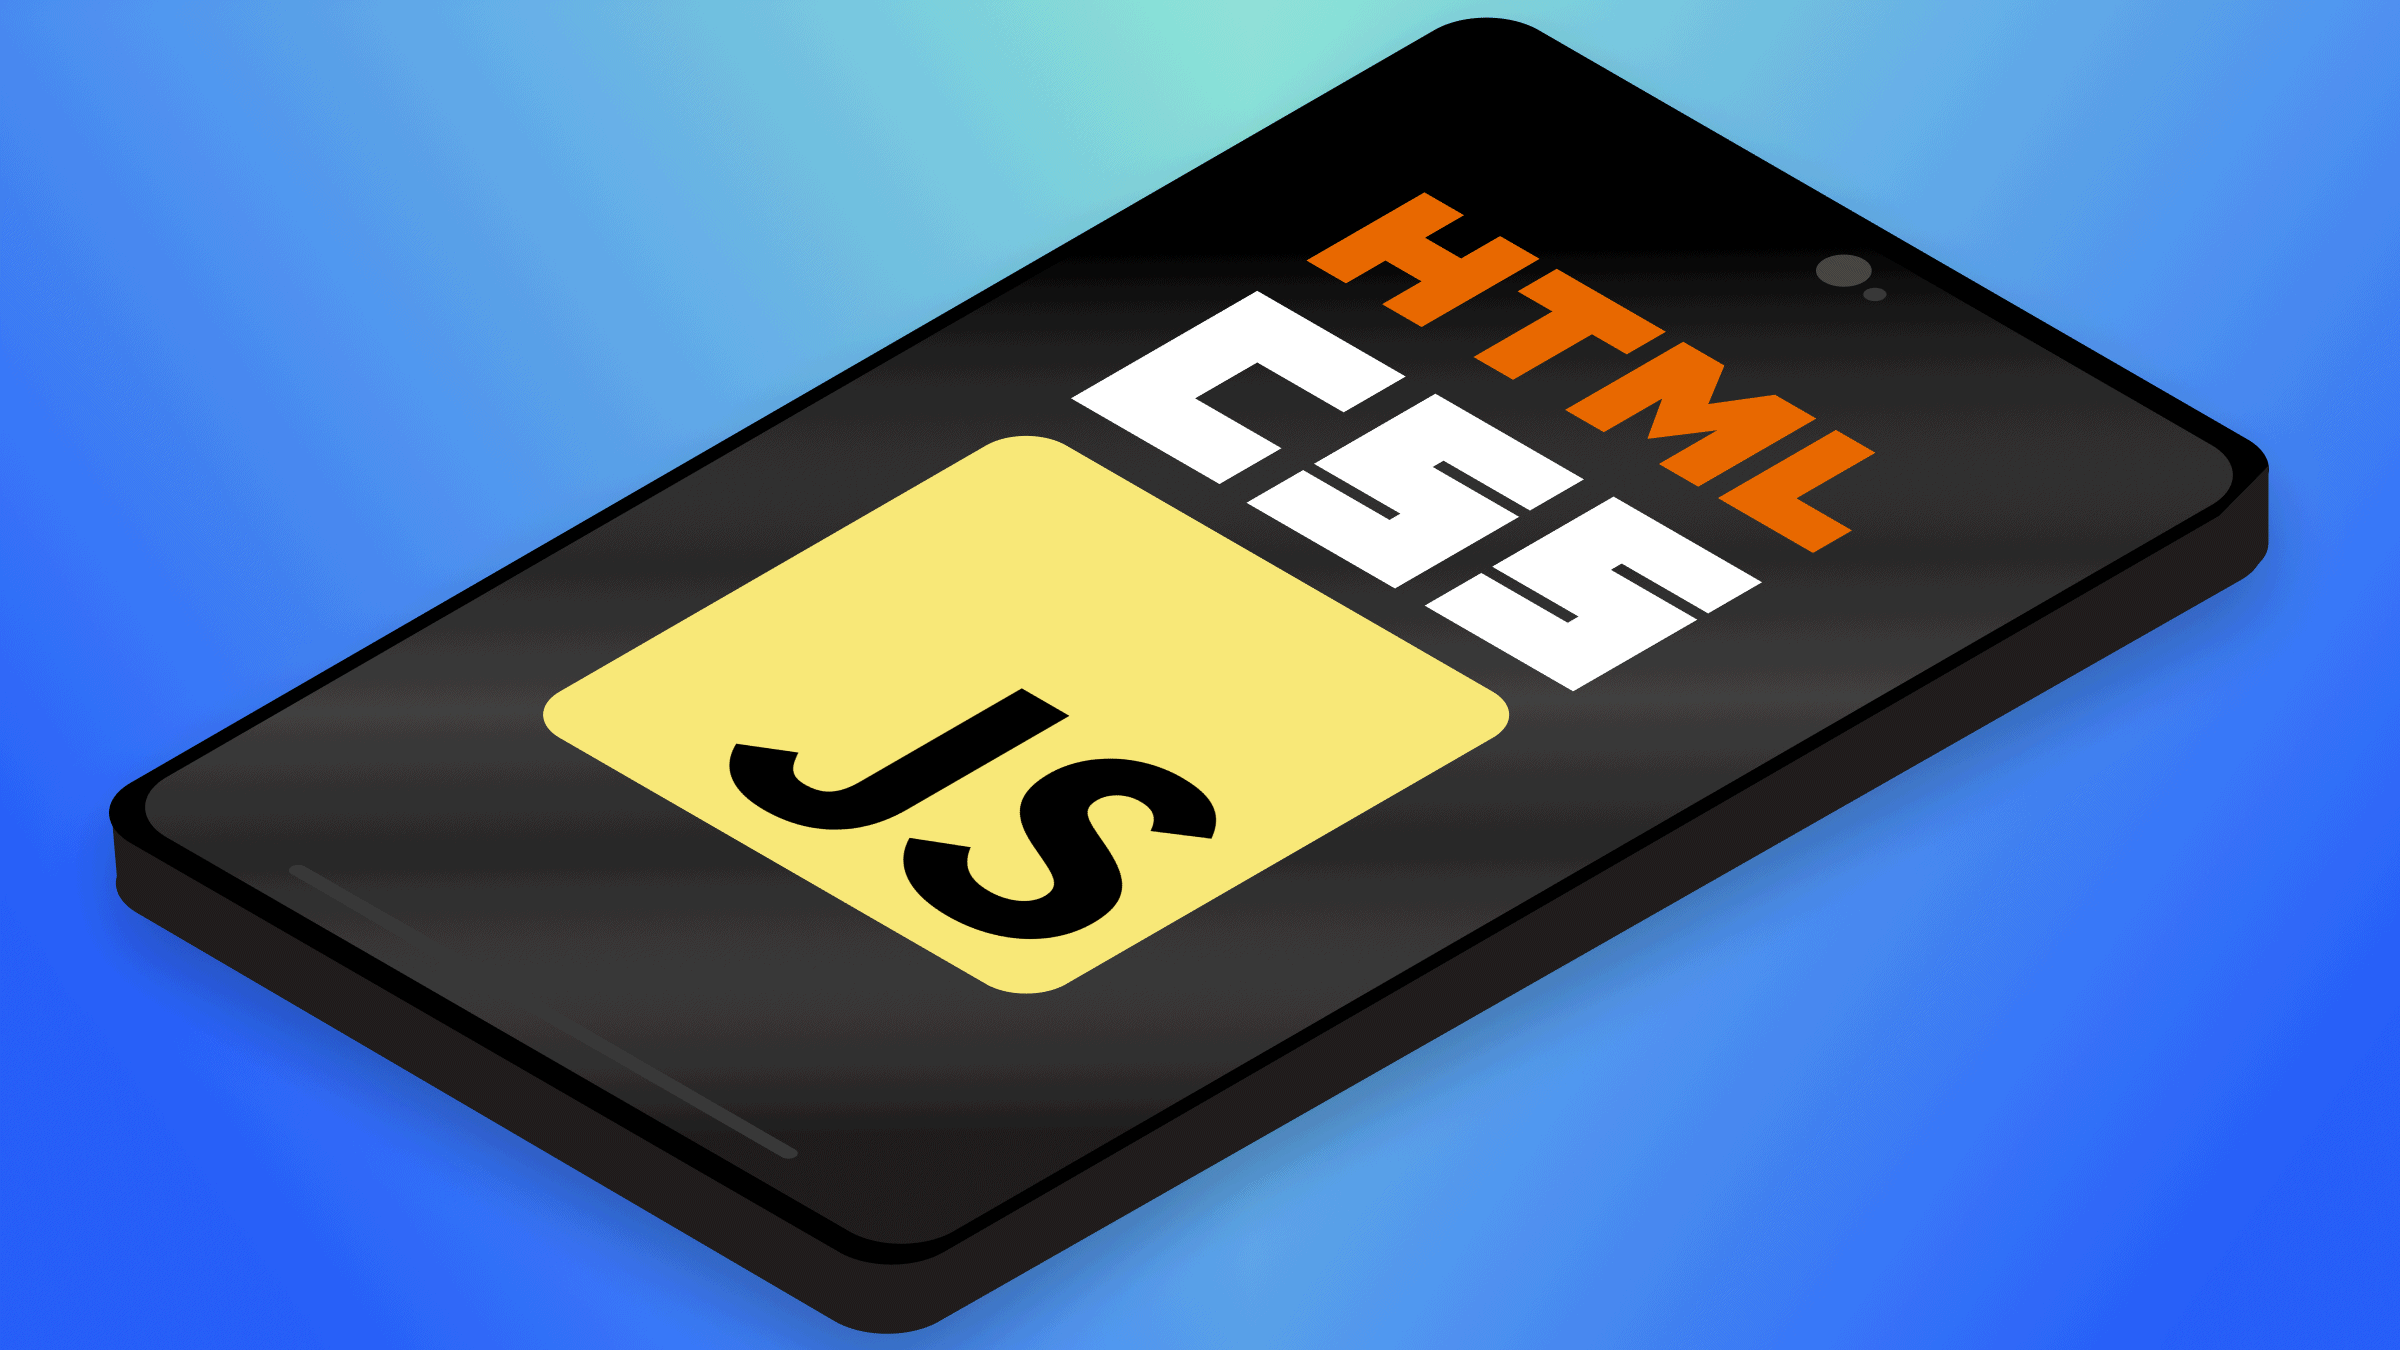 Building a Mobile App using HTML, CSS, and JavaScript